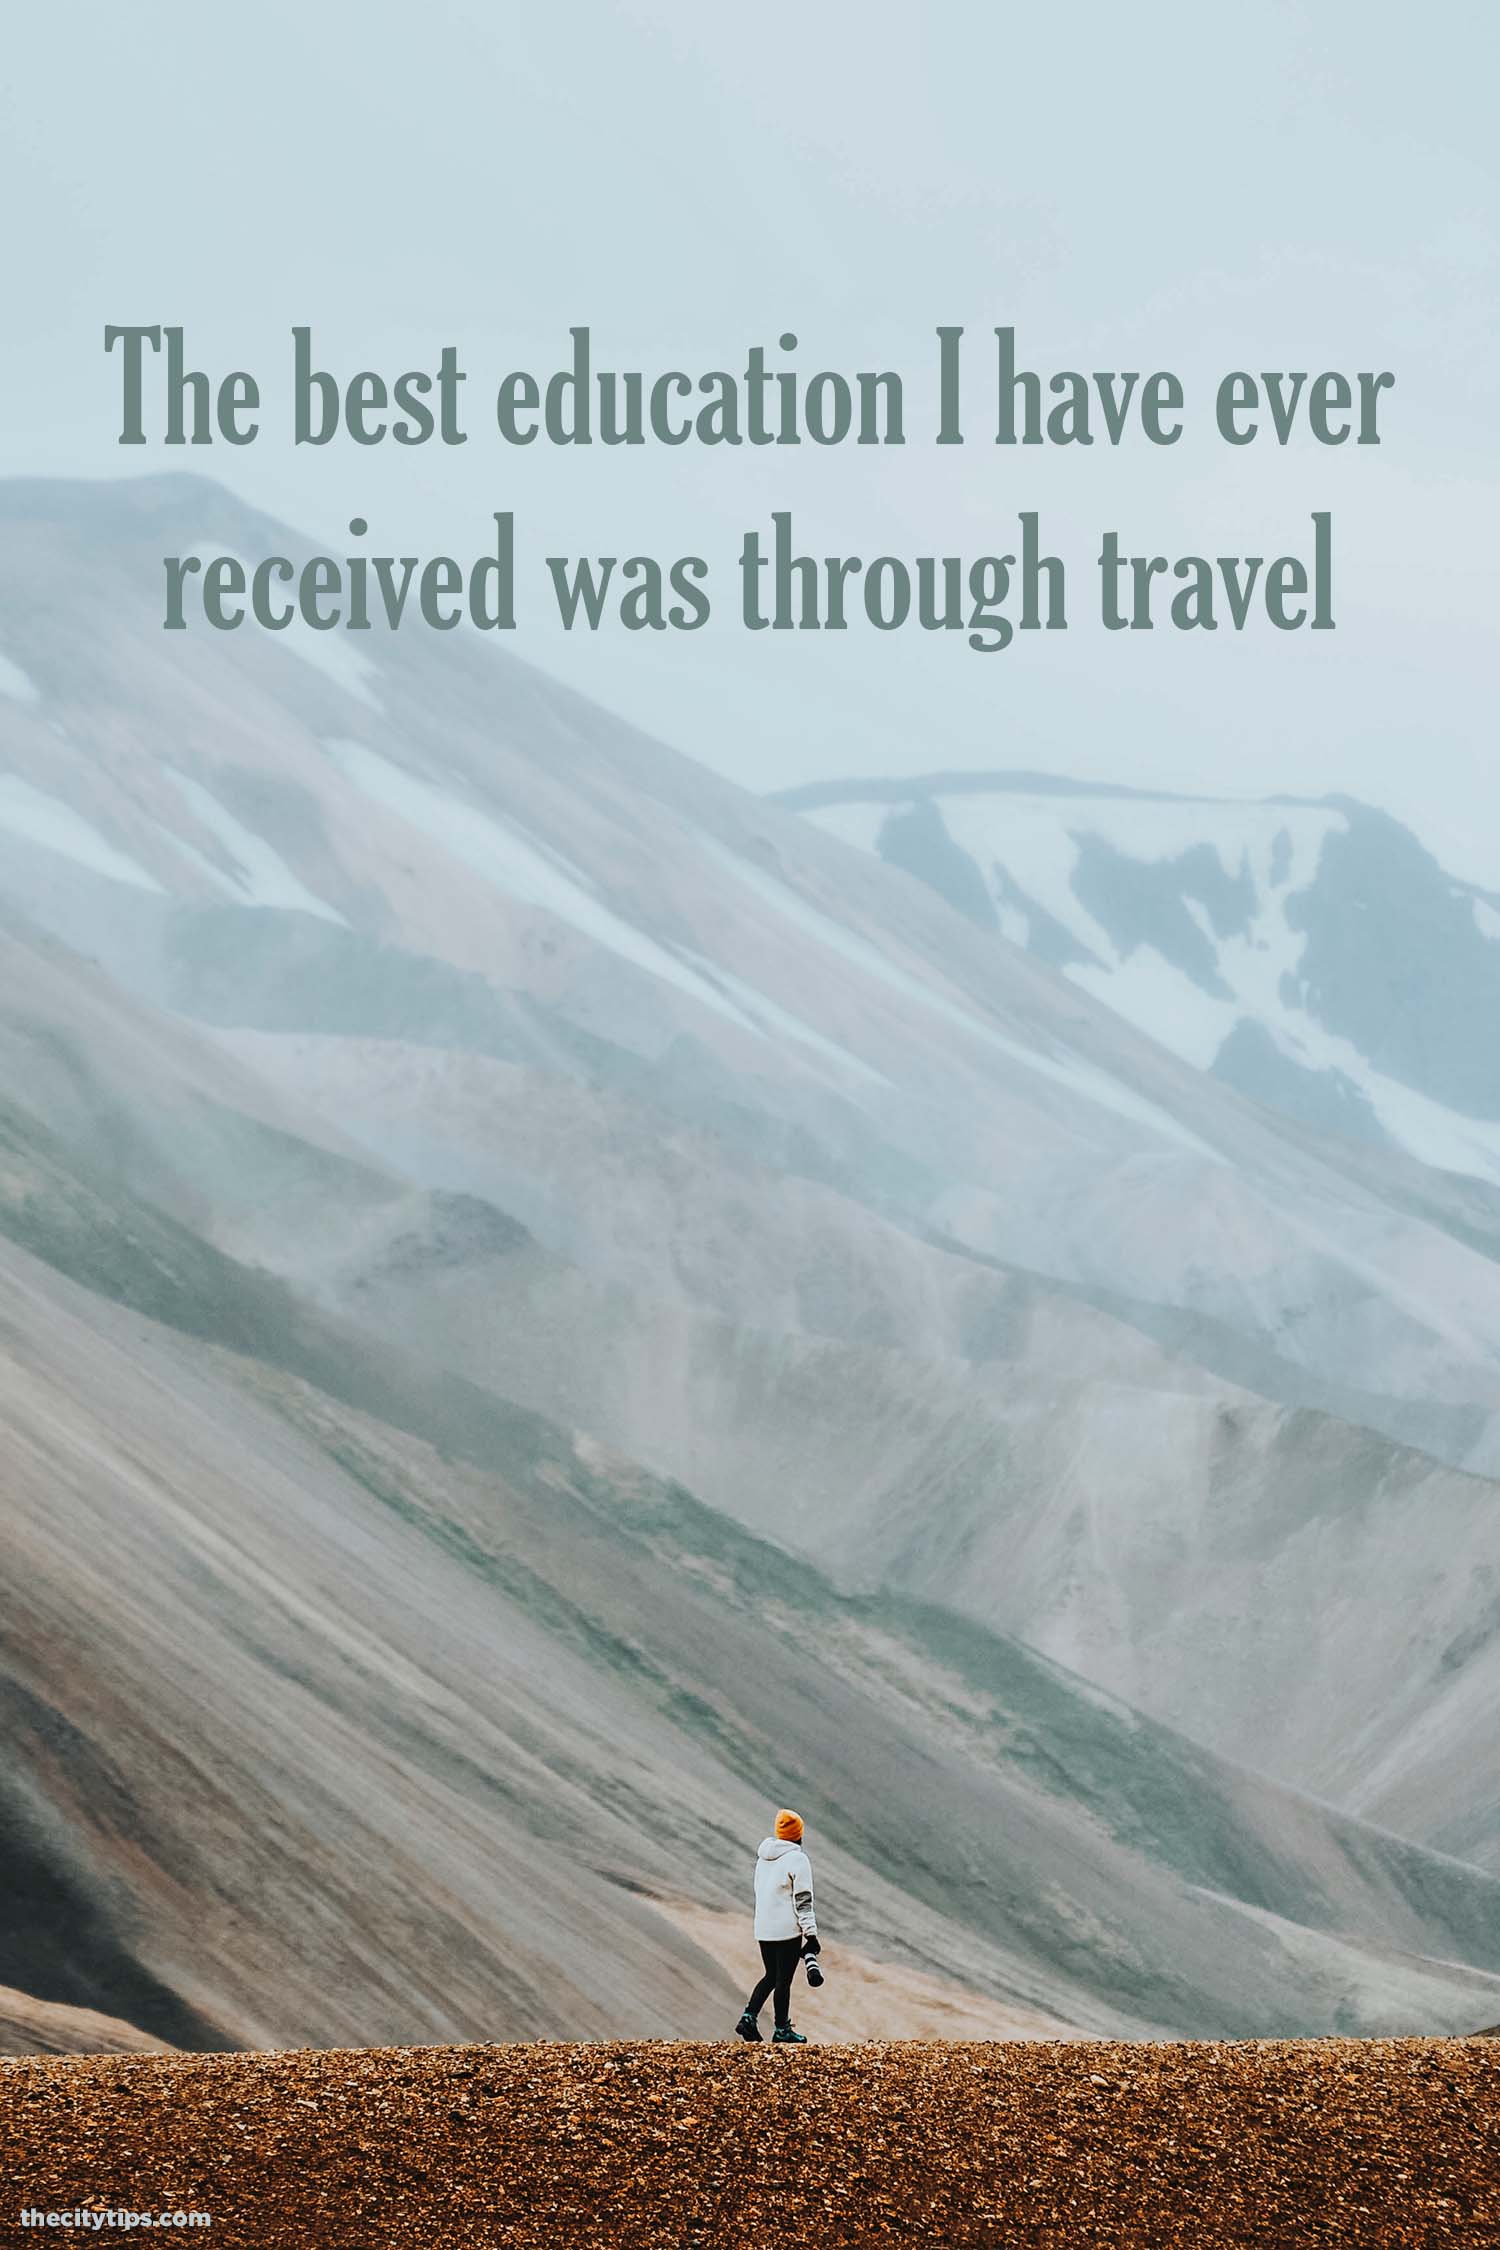 "The best education I have ever received was through travel." by Lisa Ling